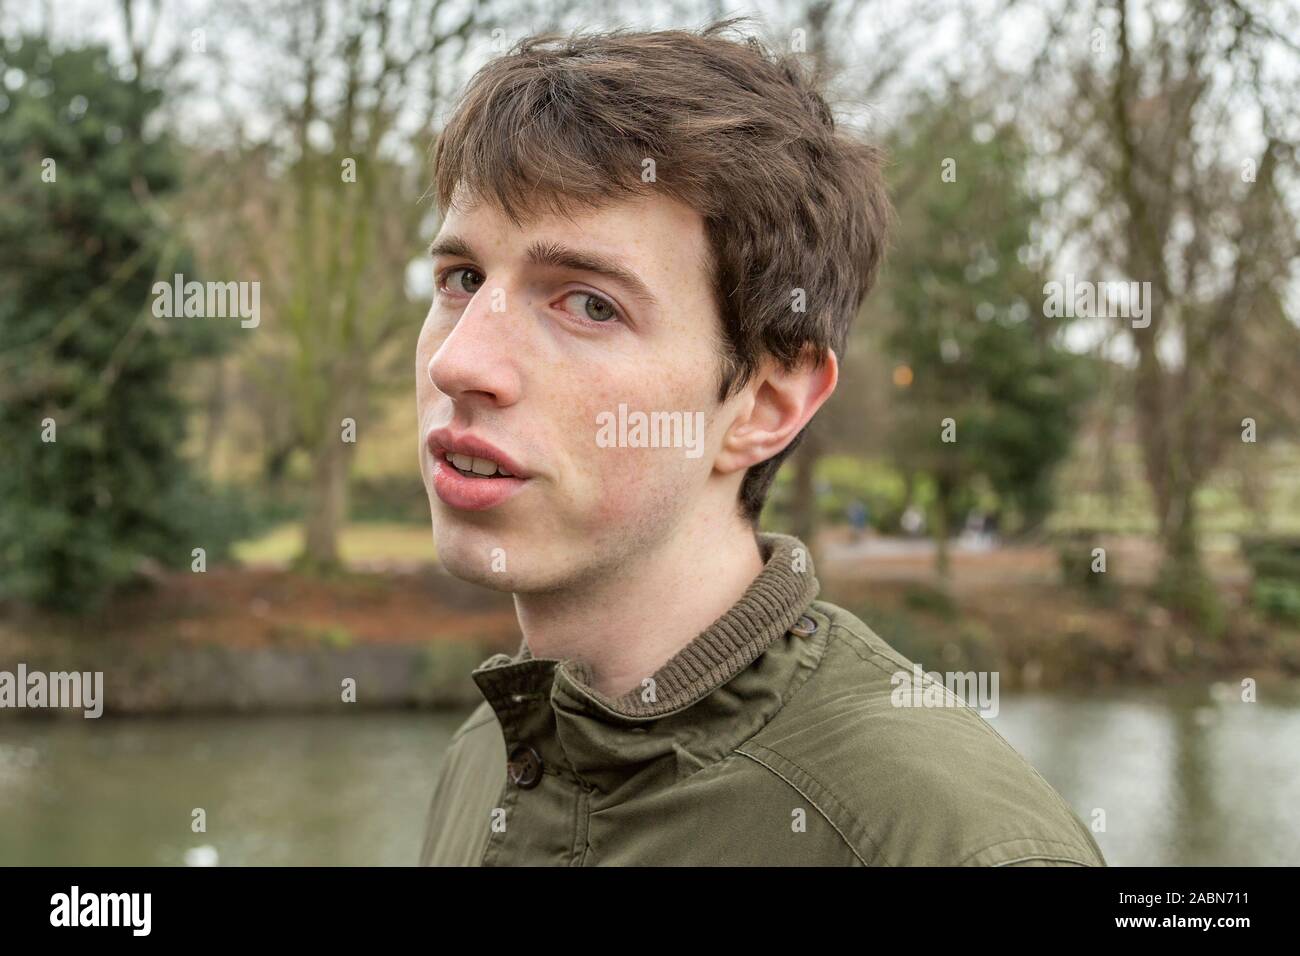 A young man in his late teens or early twenties looks questioningly as though sceptical. Stock Photo